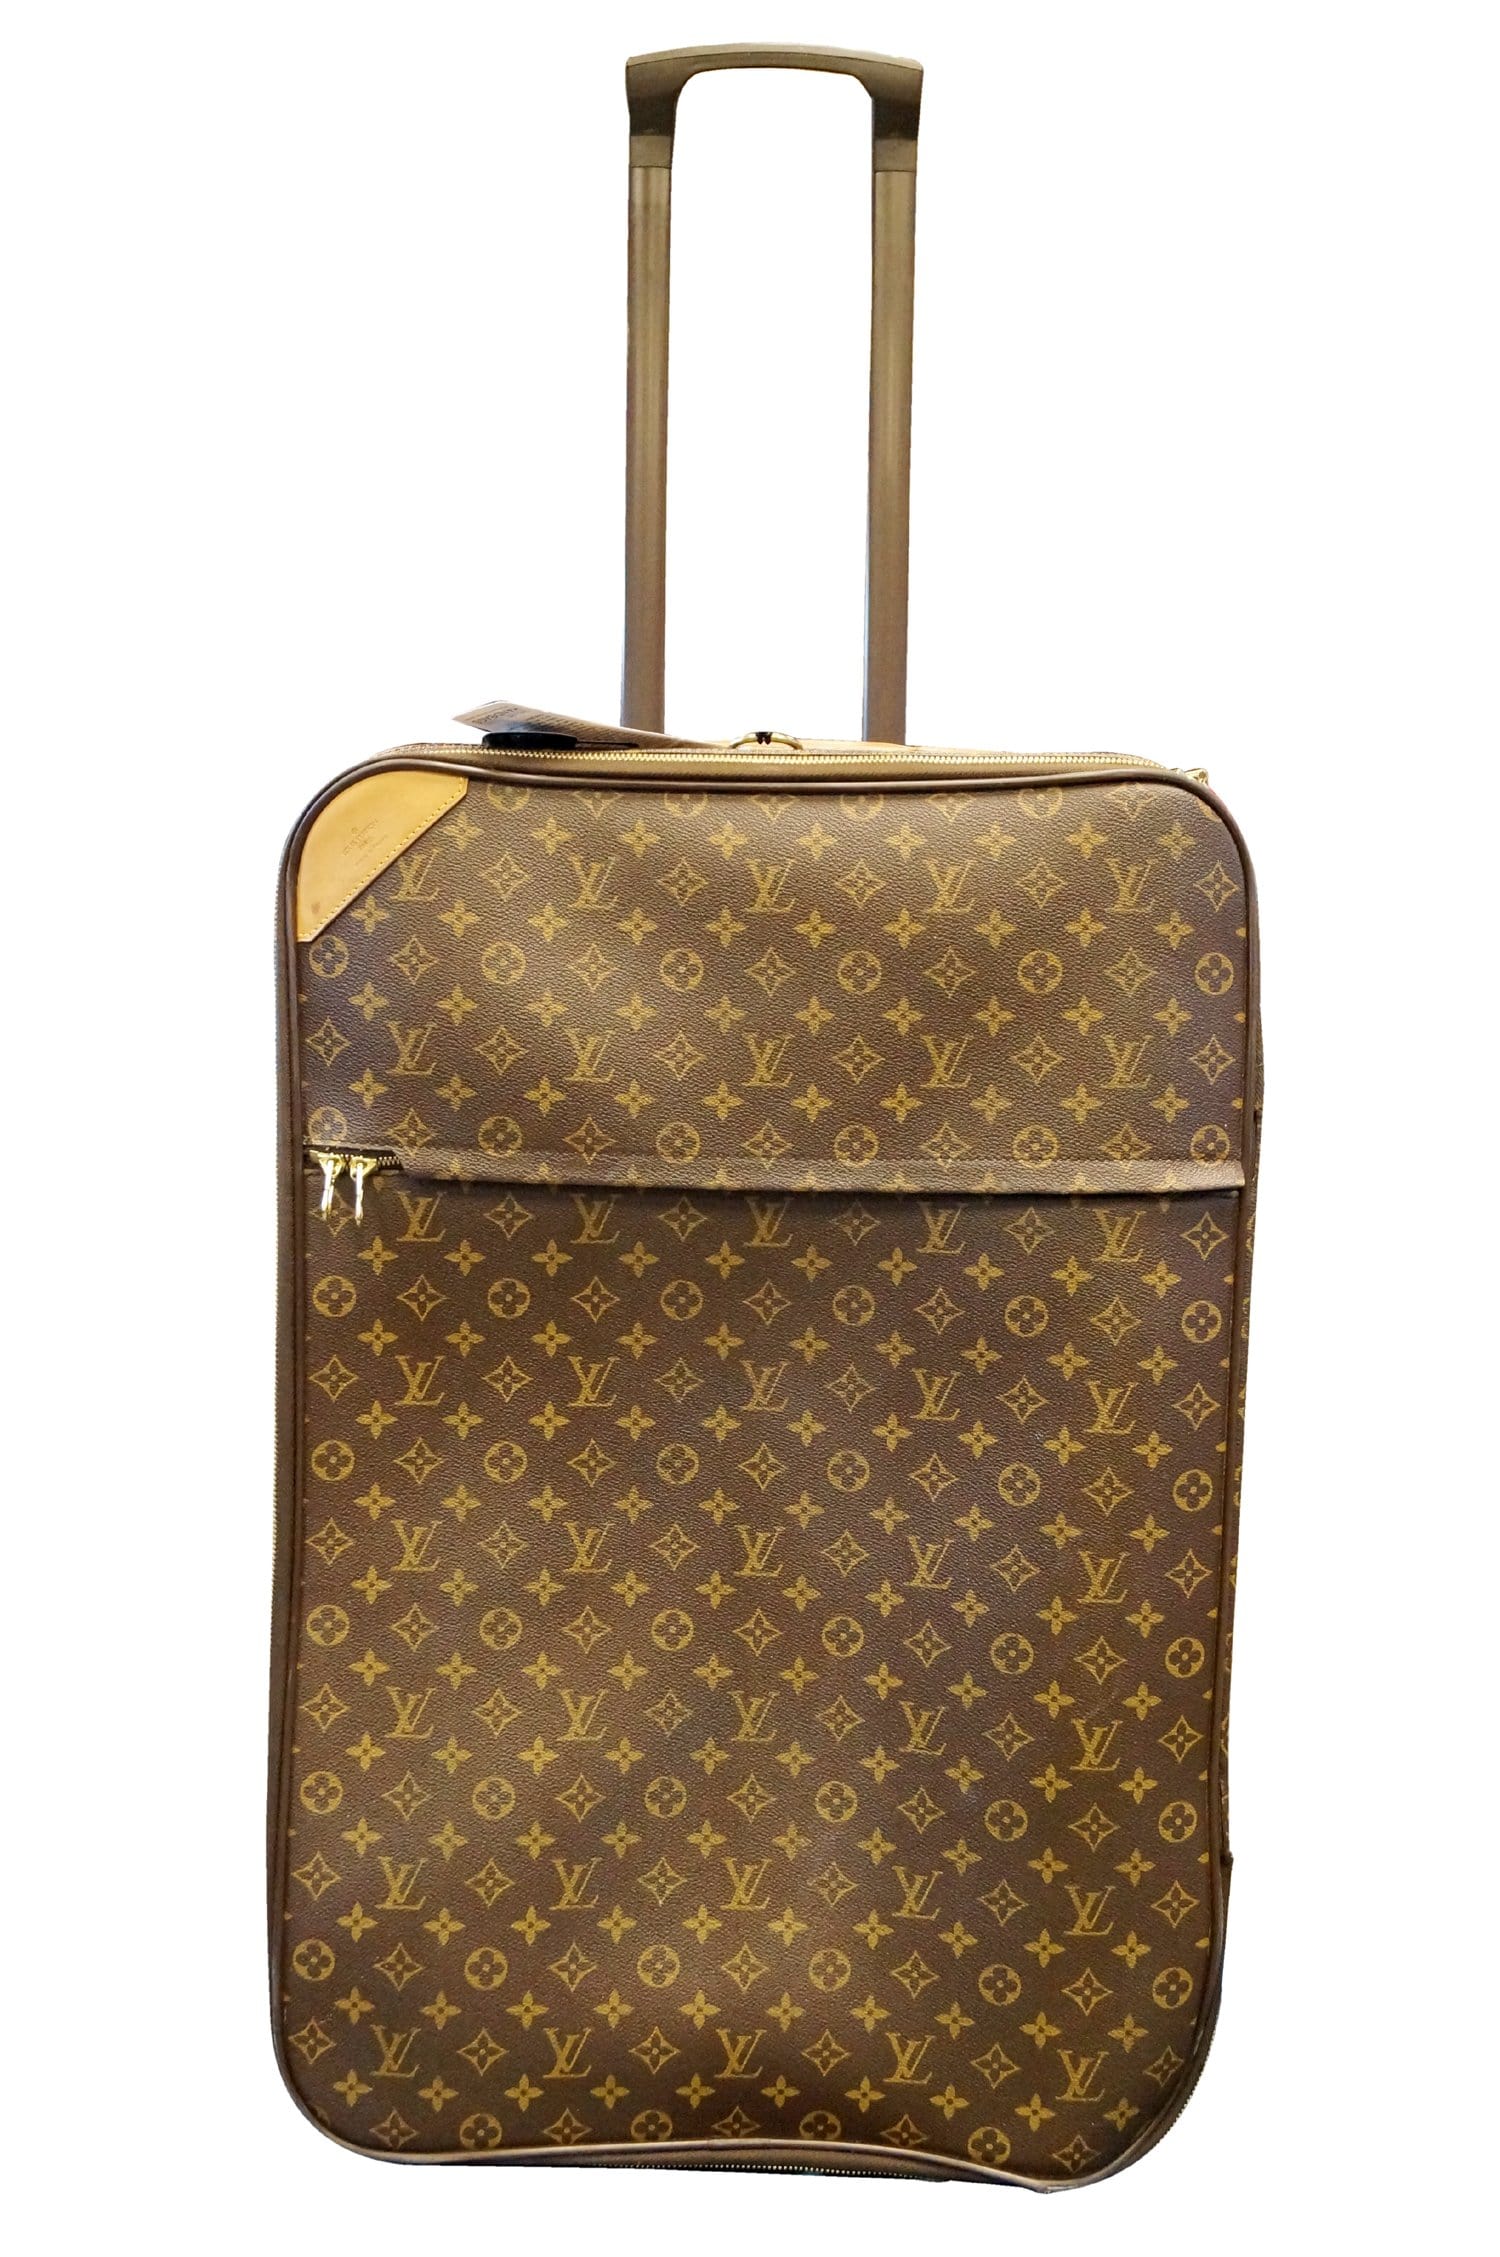 65 Louis Vuitton Luggage Images, Stock Photos, 3D objects